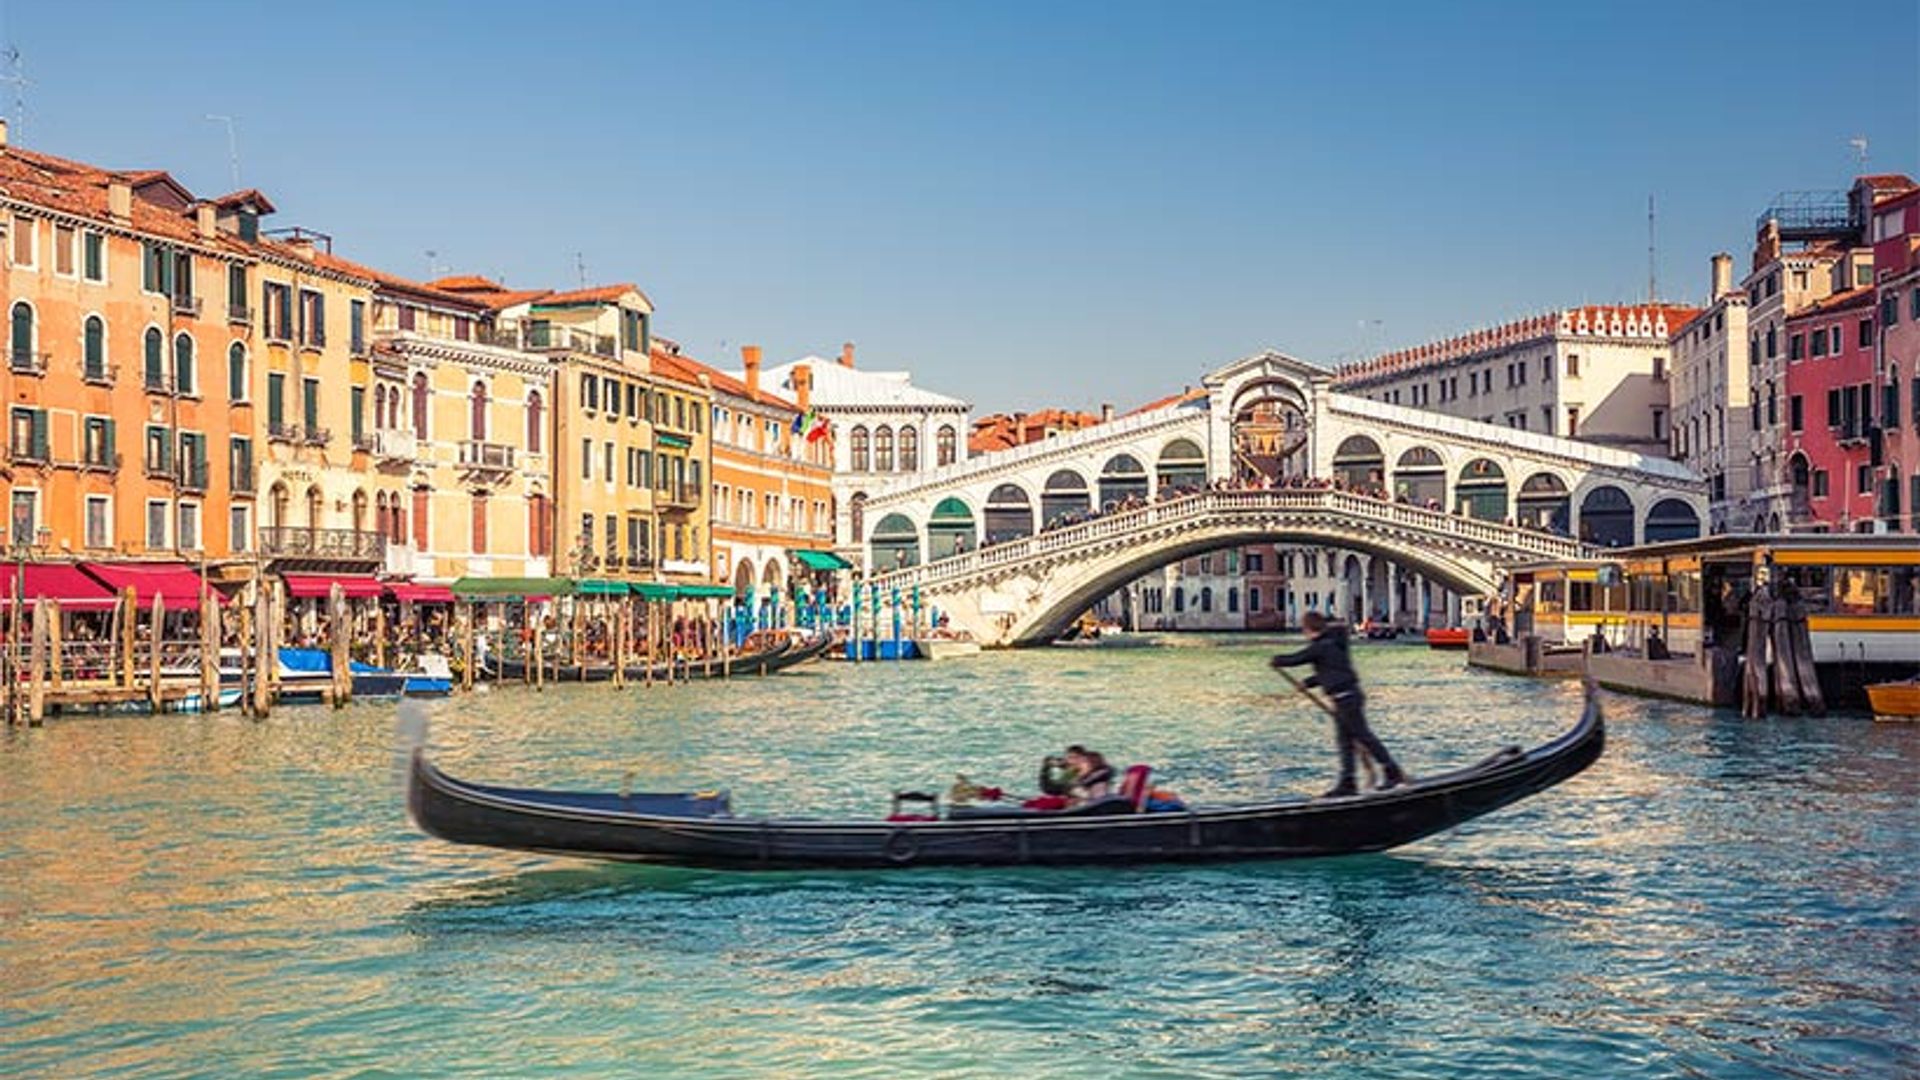 Venice introduces 12 golden rules for tourists in new campaign